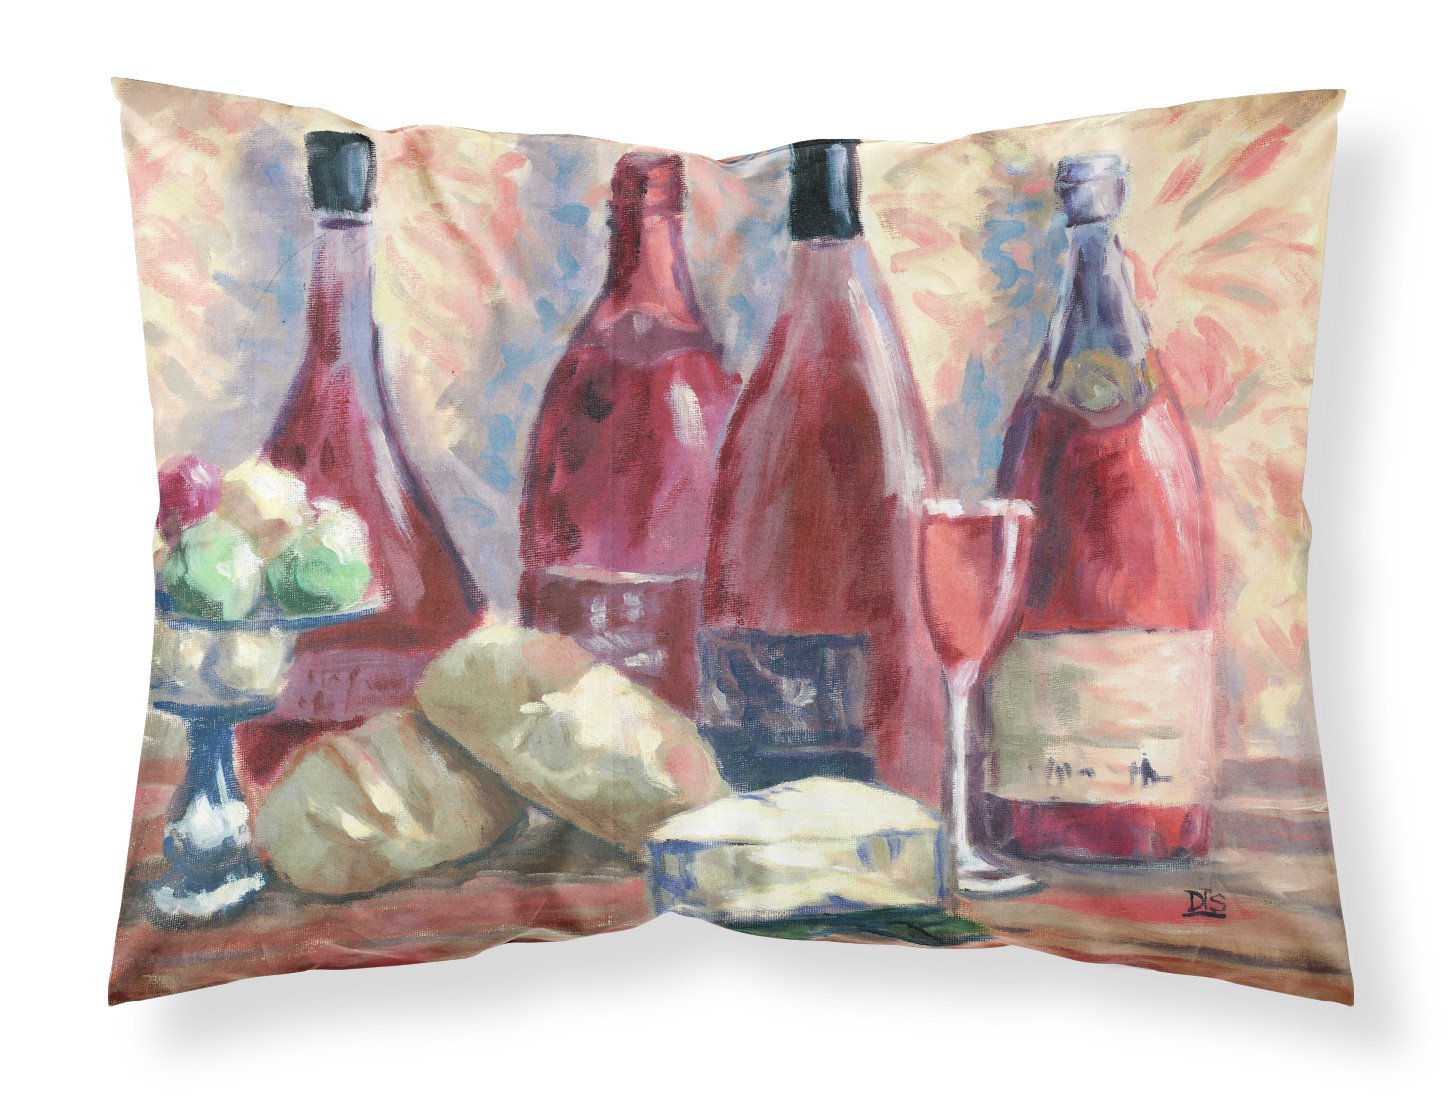 Wine and Cheese by David Smith Fabric Standard Pillowcase SDSM0127PILLOWCASE by Caroline's Treasures